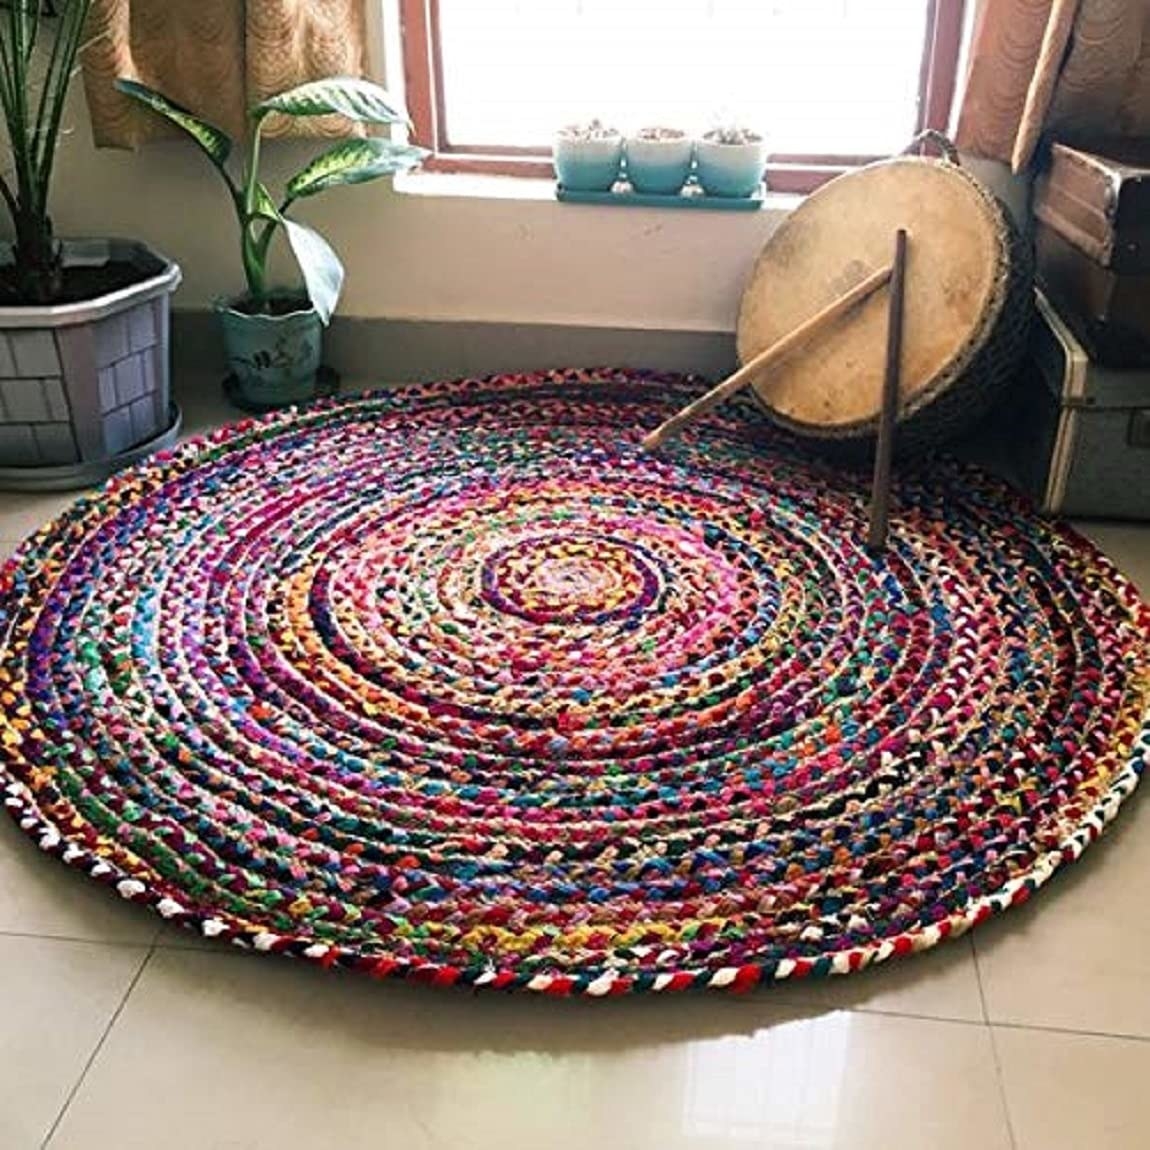 A colourful circular rug on the floor next to some plants 